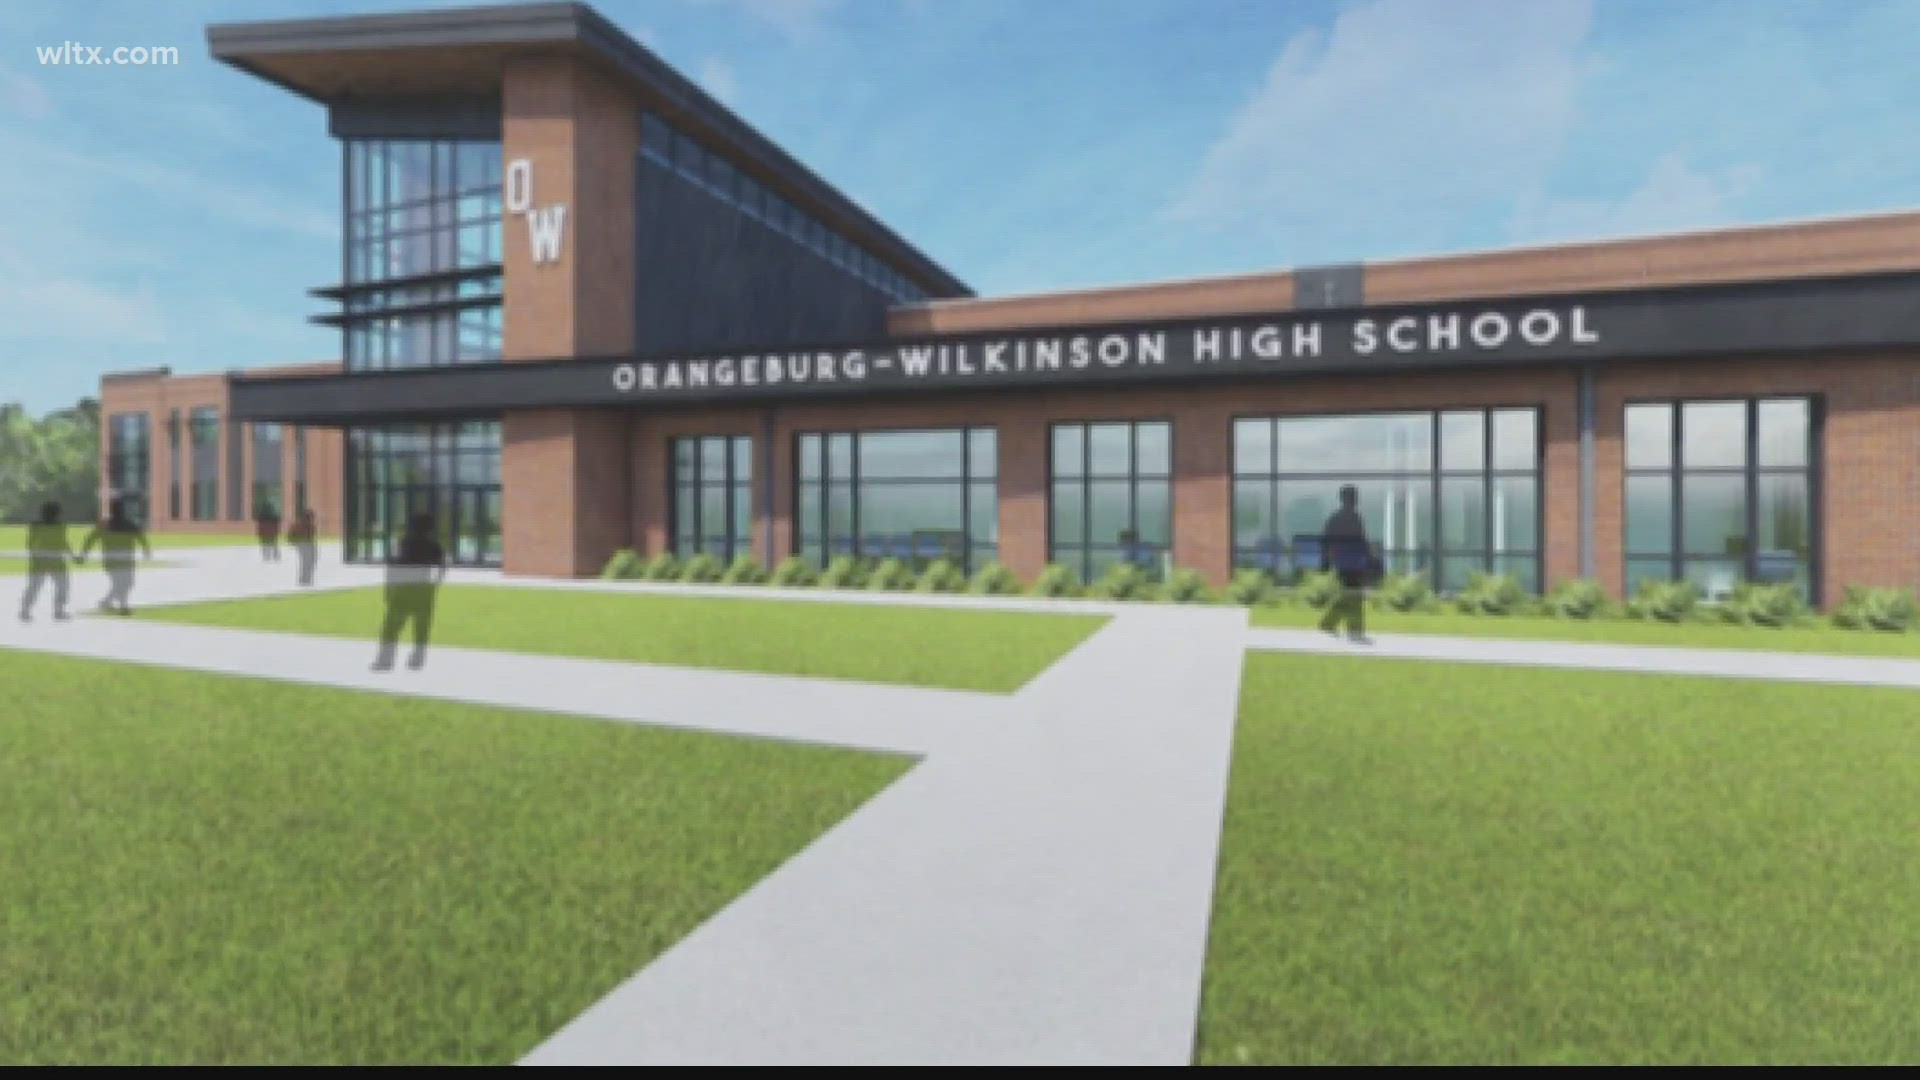 The project is estimated to cost $125 million and is being funded as part of a $190 million bond referendum approved by voters last year.